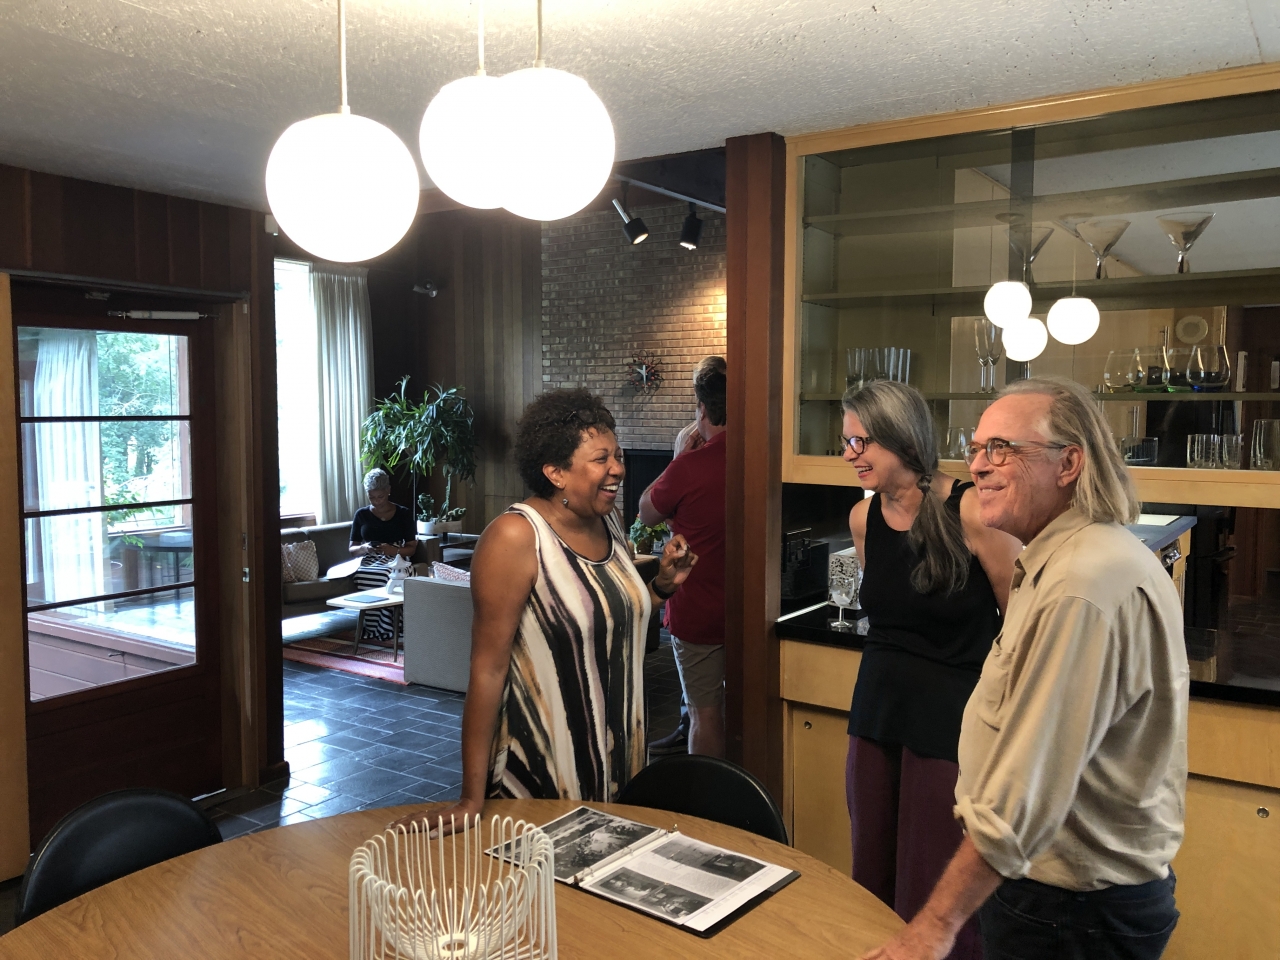 CBB visited this beautiful Keck & Keck house in Chicago Heights on August 11th, 2019